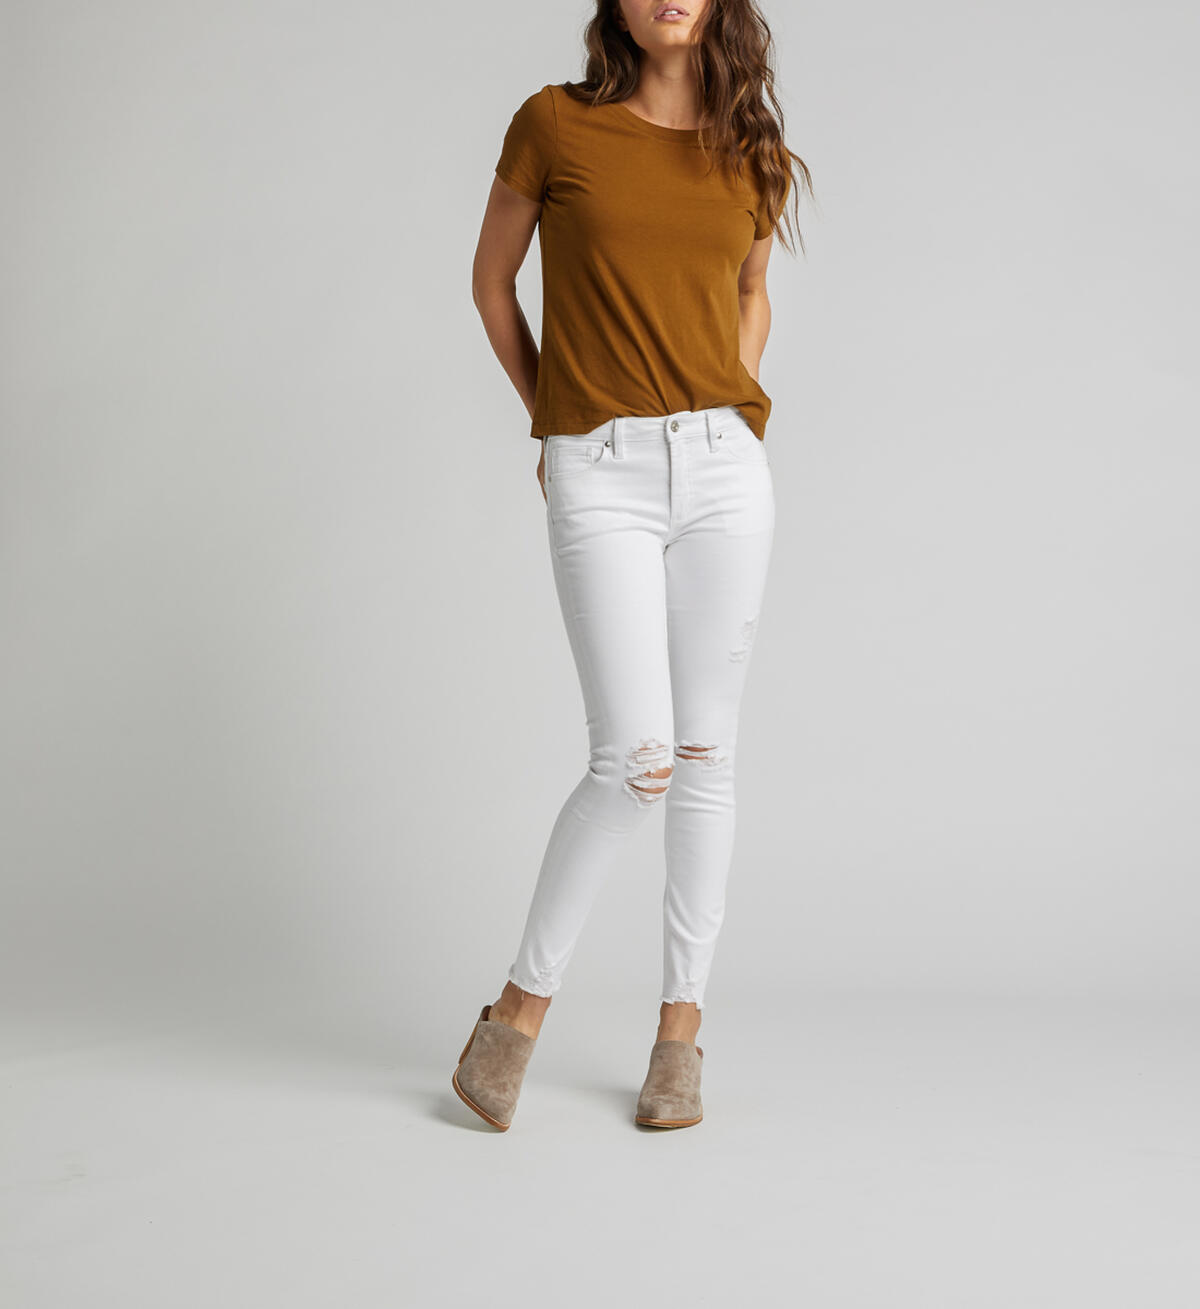 Most Wanted Mid Rise Skinny Leg Jeans, , hi-res image number 0